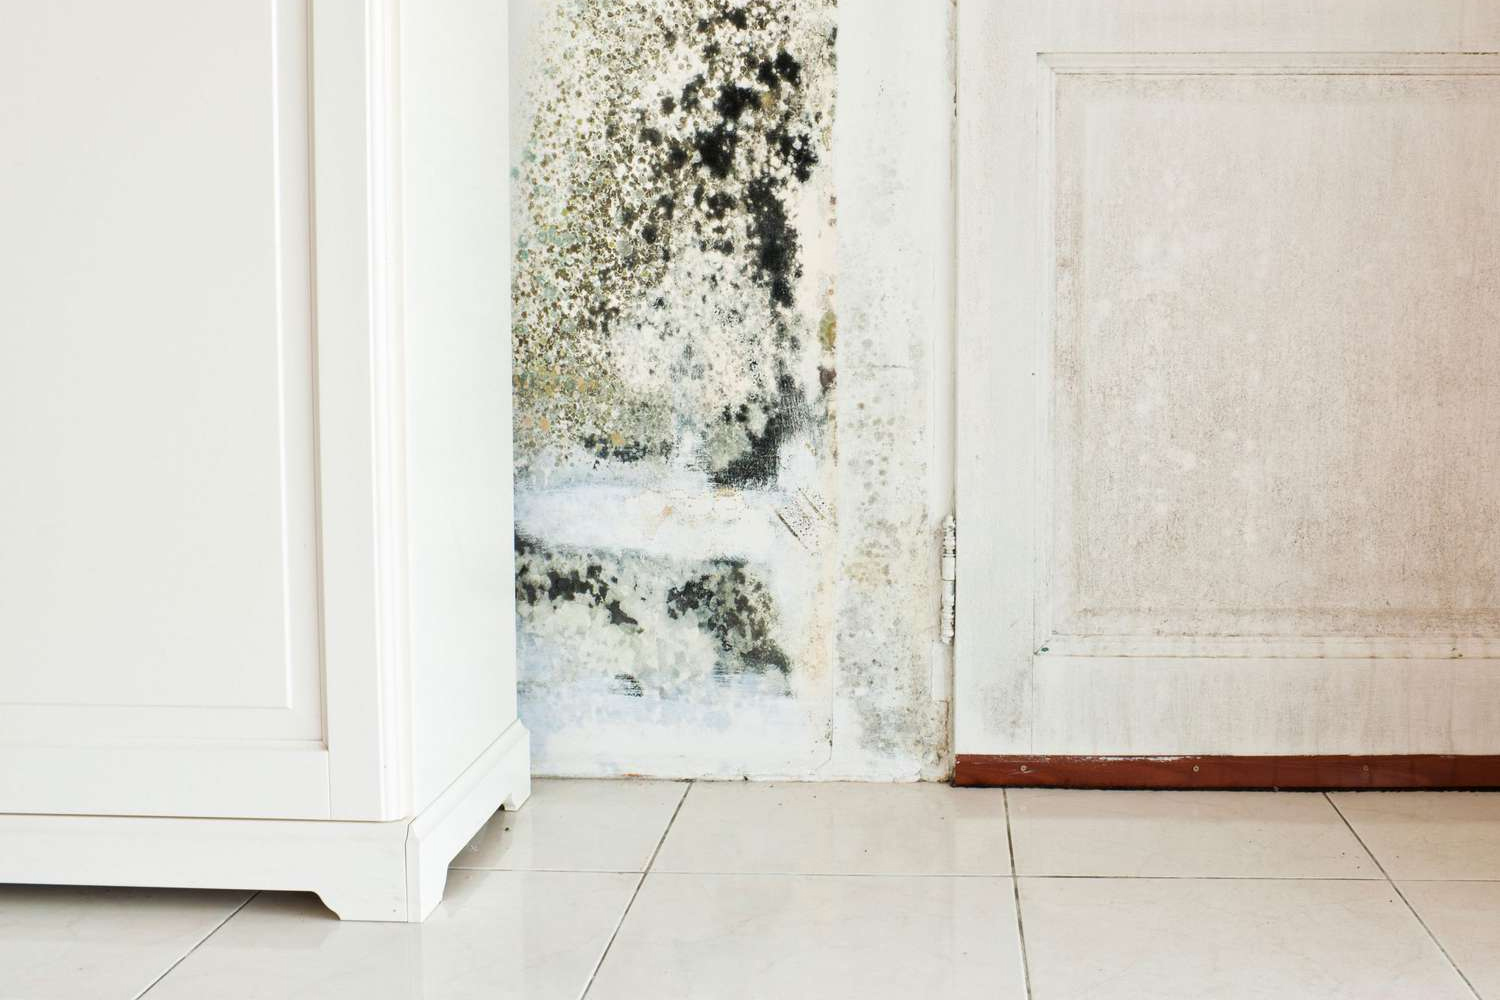 Top 5 Mold-Prone Areas in Homes You Should be Aware of